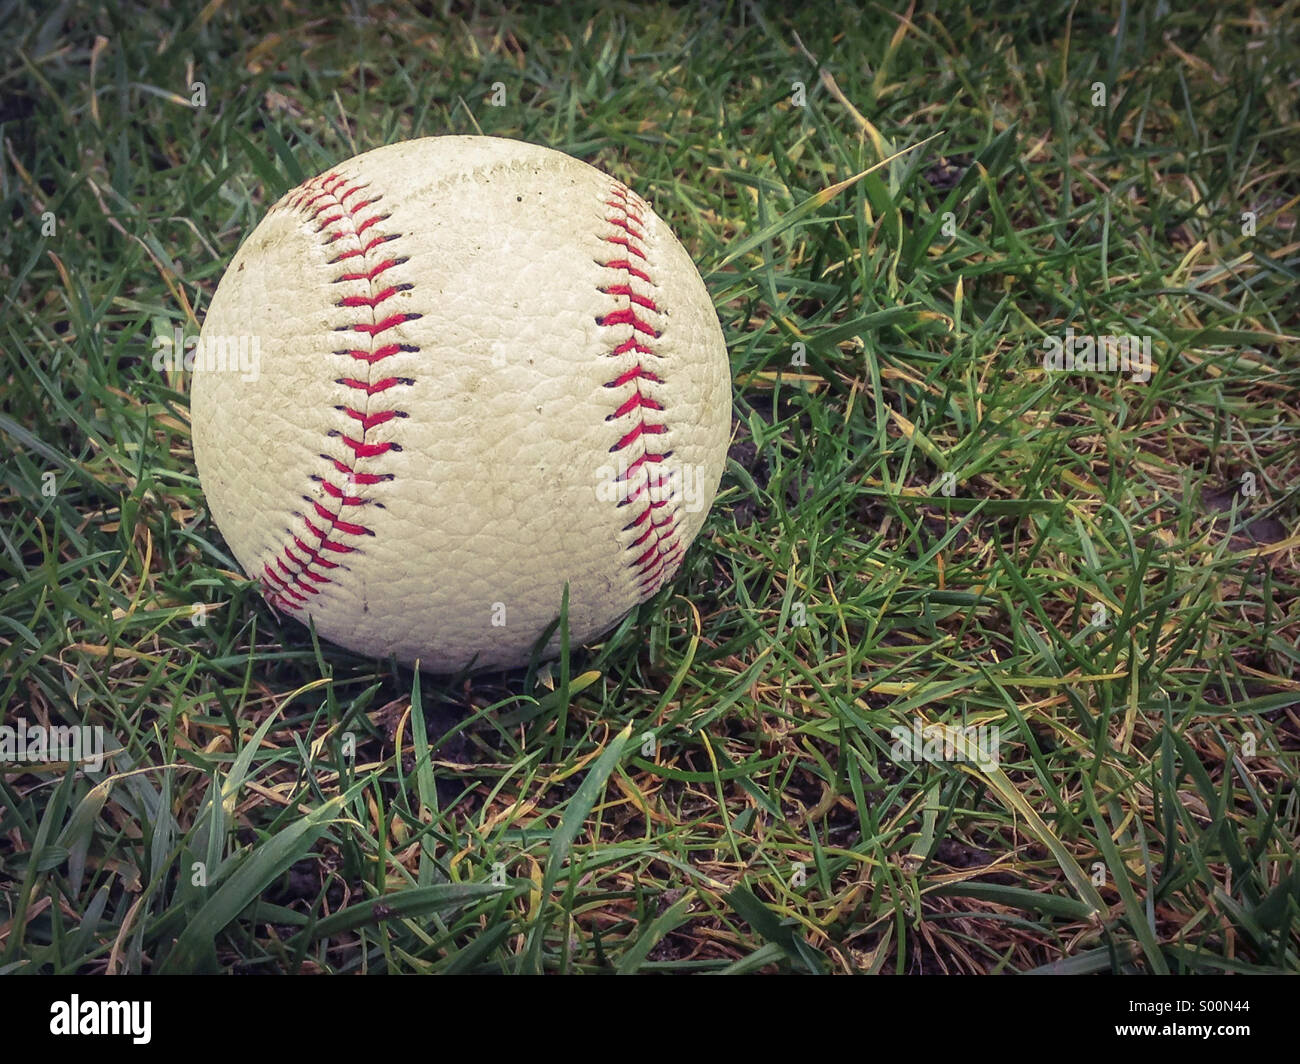 Baseball on grass. Vintage style picture. Stock Photo